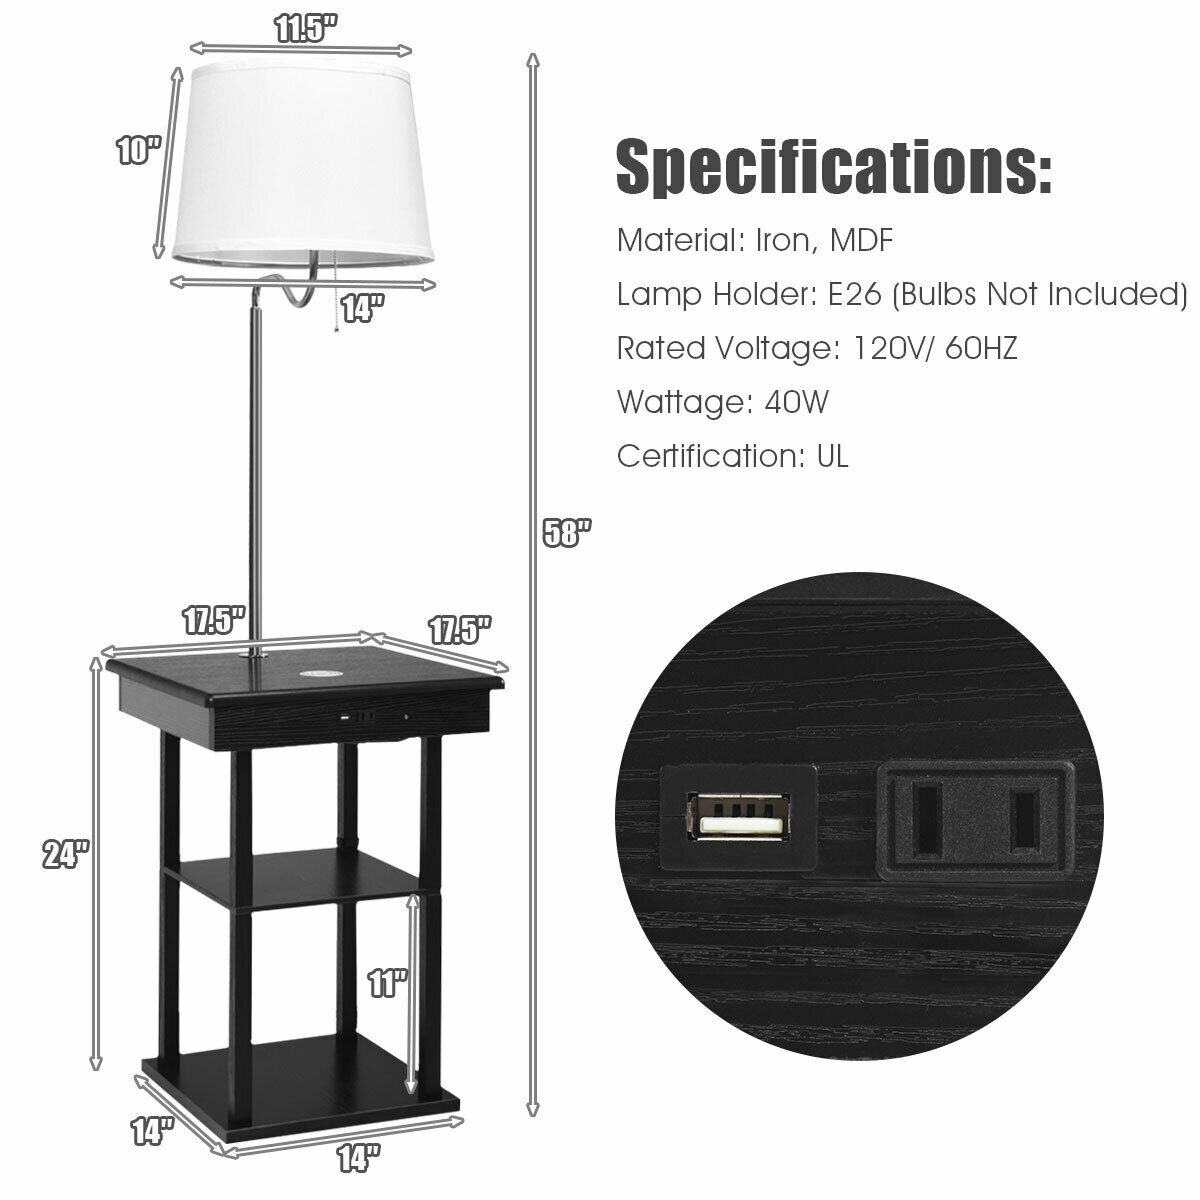 Costway Floor Lamp End Table Modern, Small Side Table With Lamp Attached